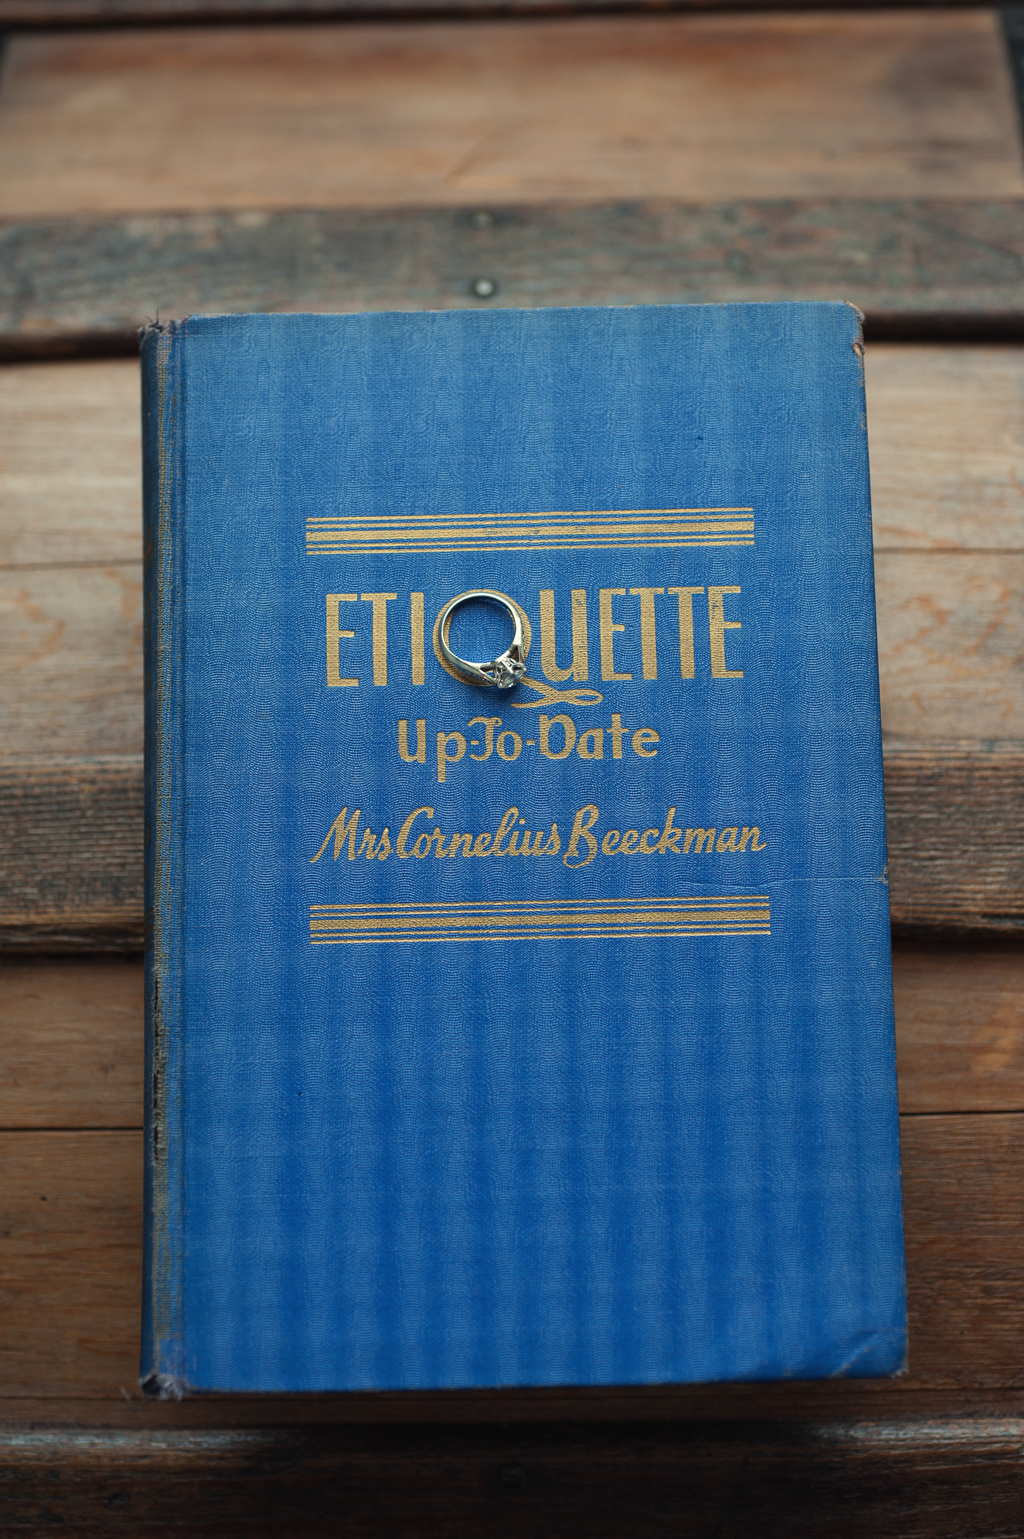 wedding ring sits on a book titled etiquette up to date